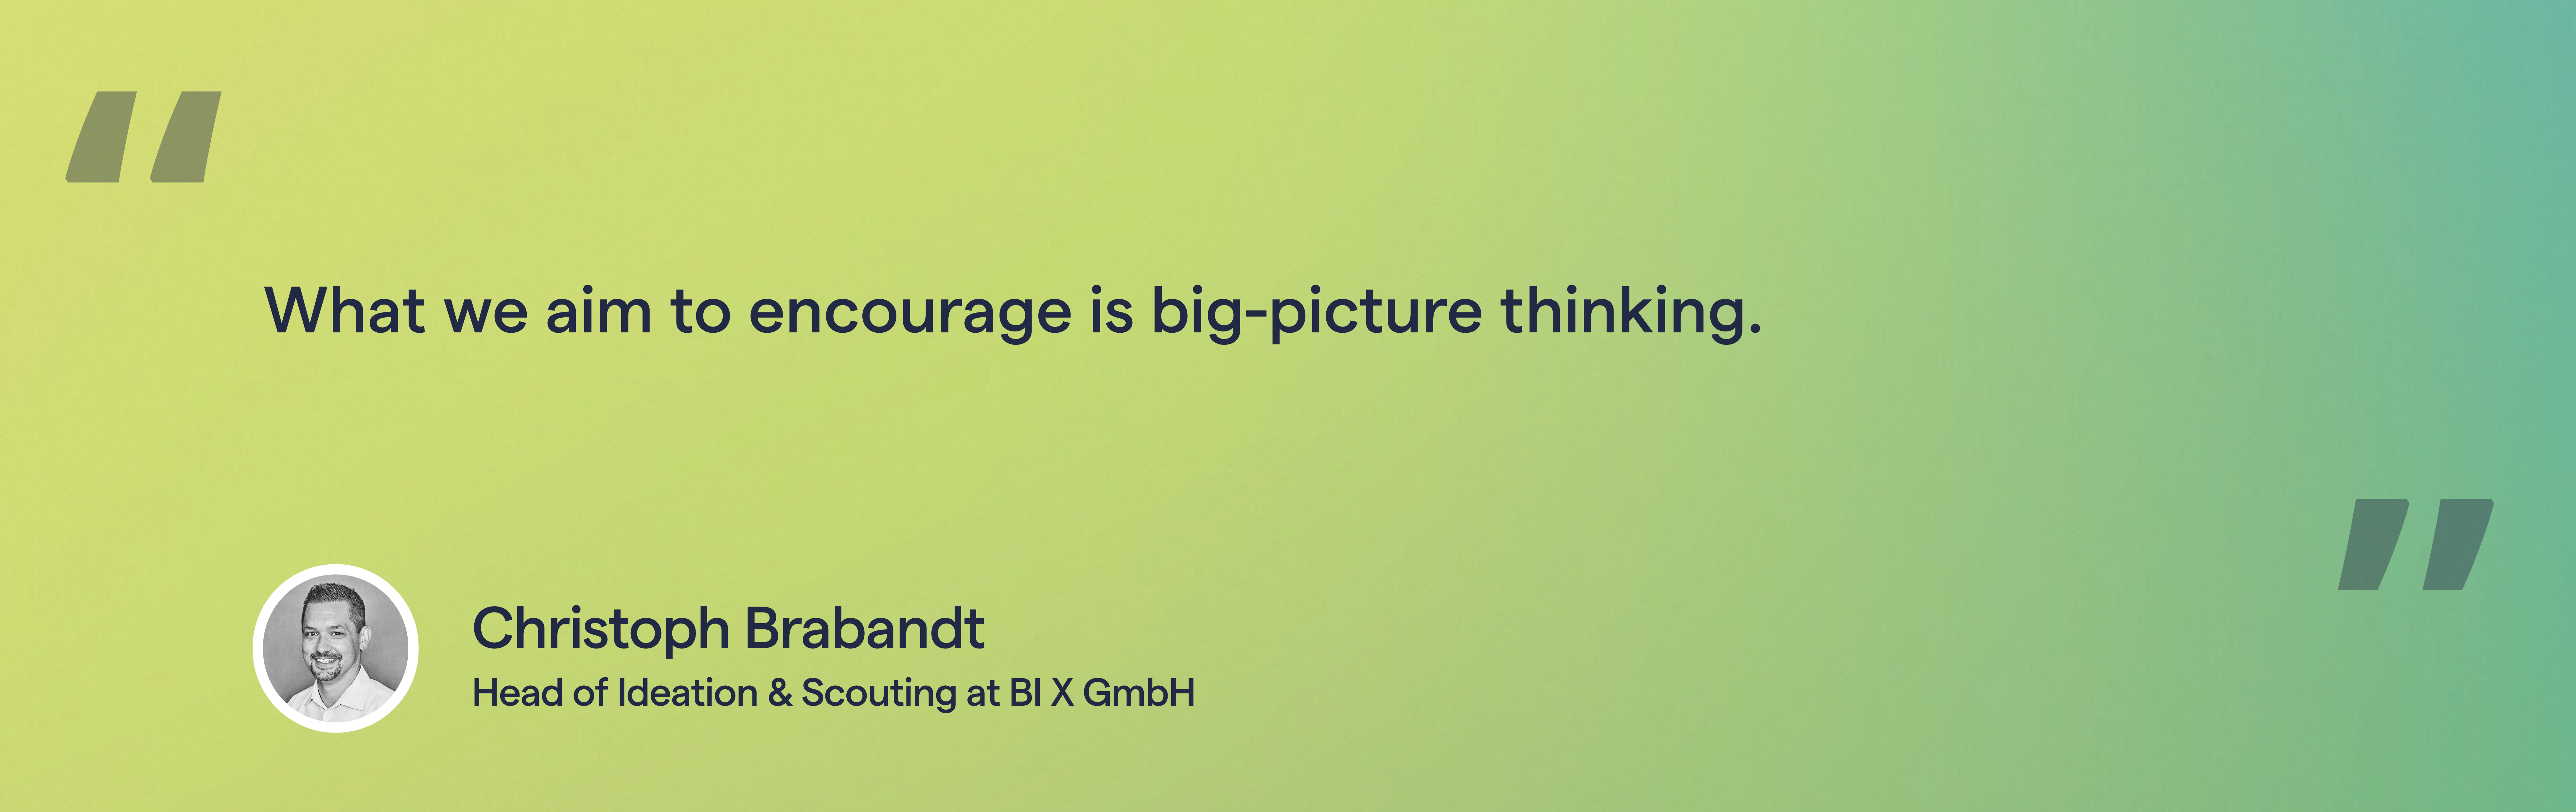 Christoph Brabandt, Head of Digital Ideation and Scouting at BI X Digital Lab, emphasizes the importance of big-picture thinking in healthcare digital innovation. 